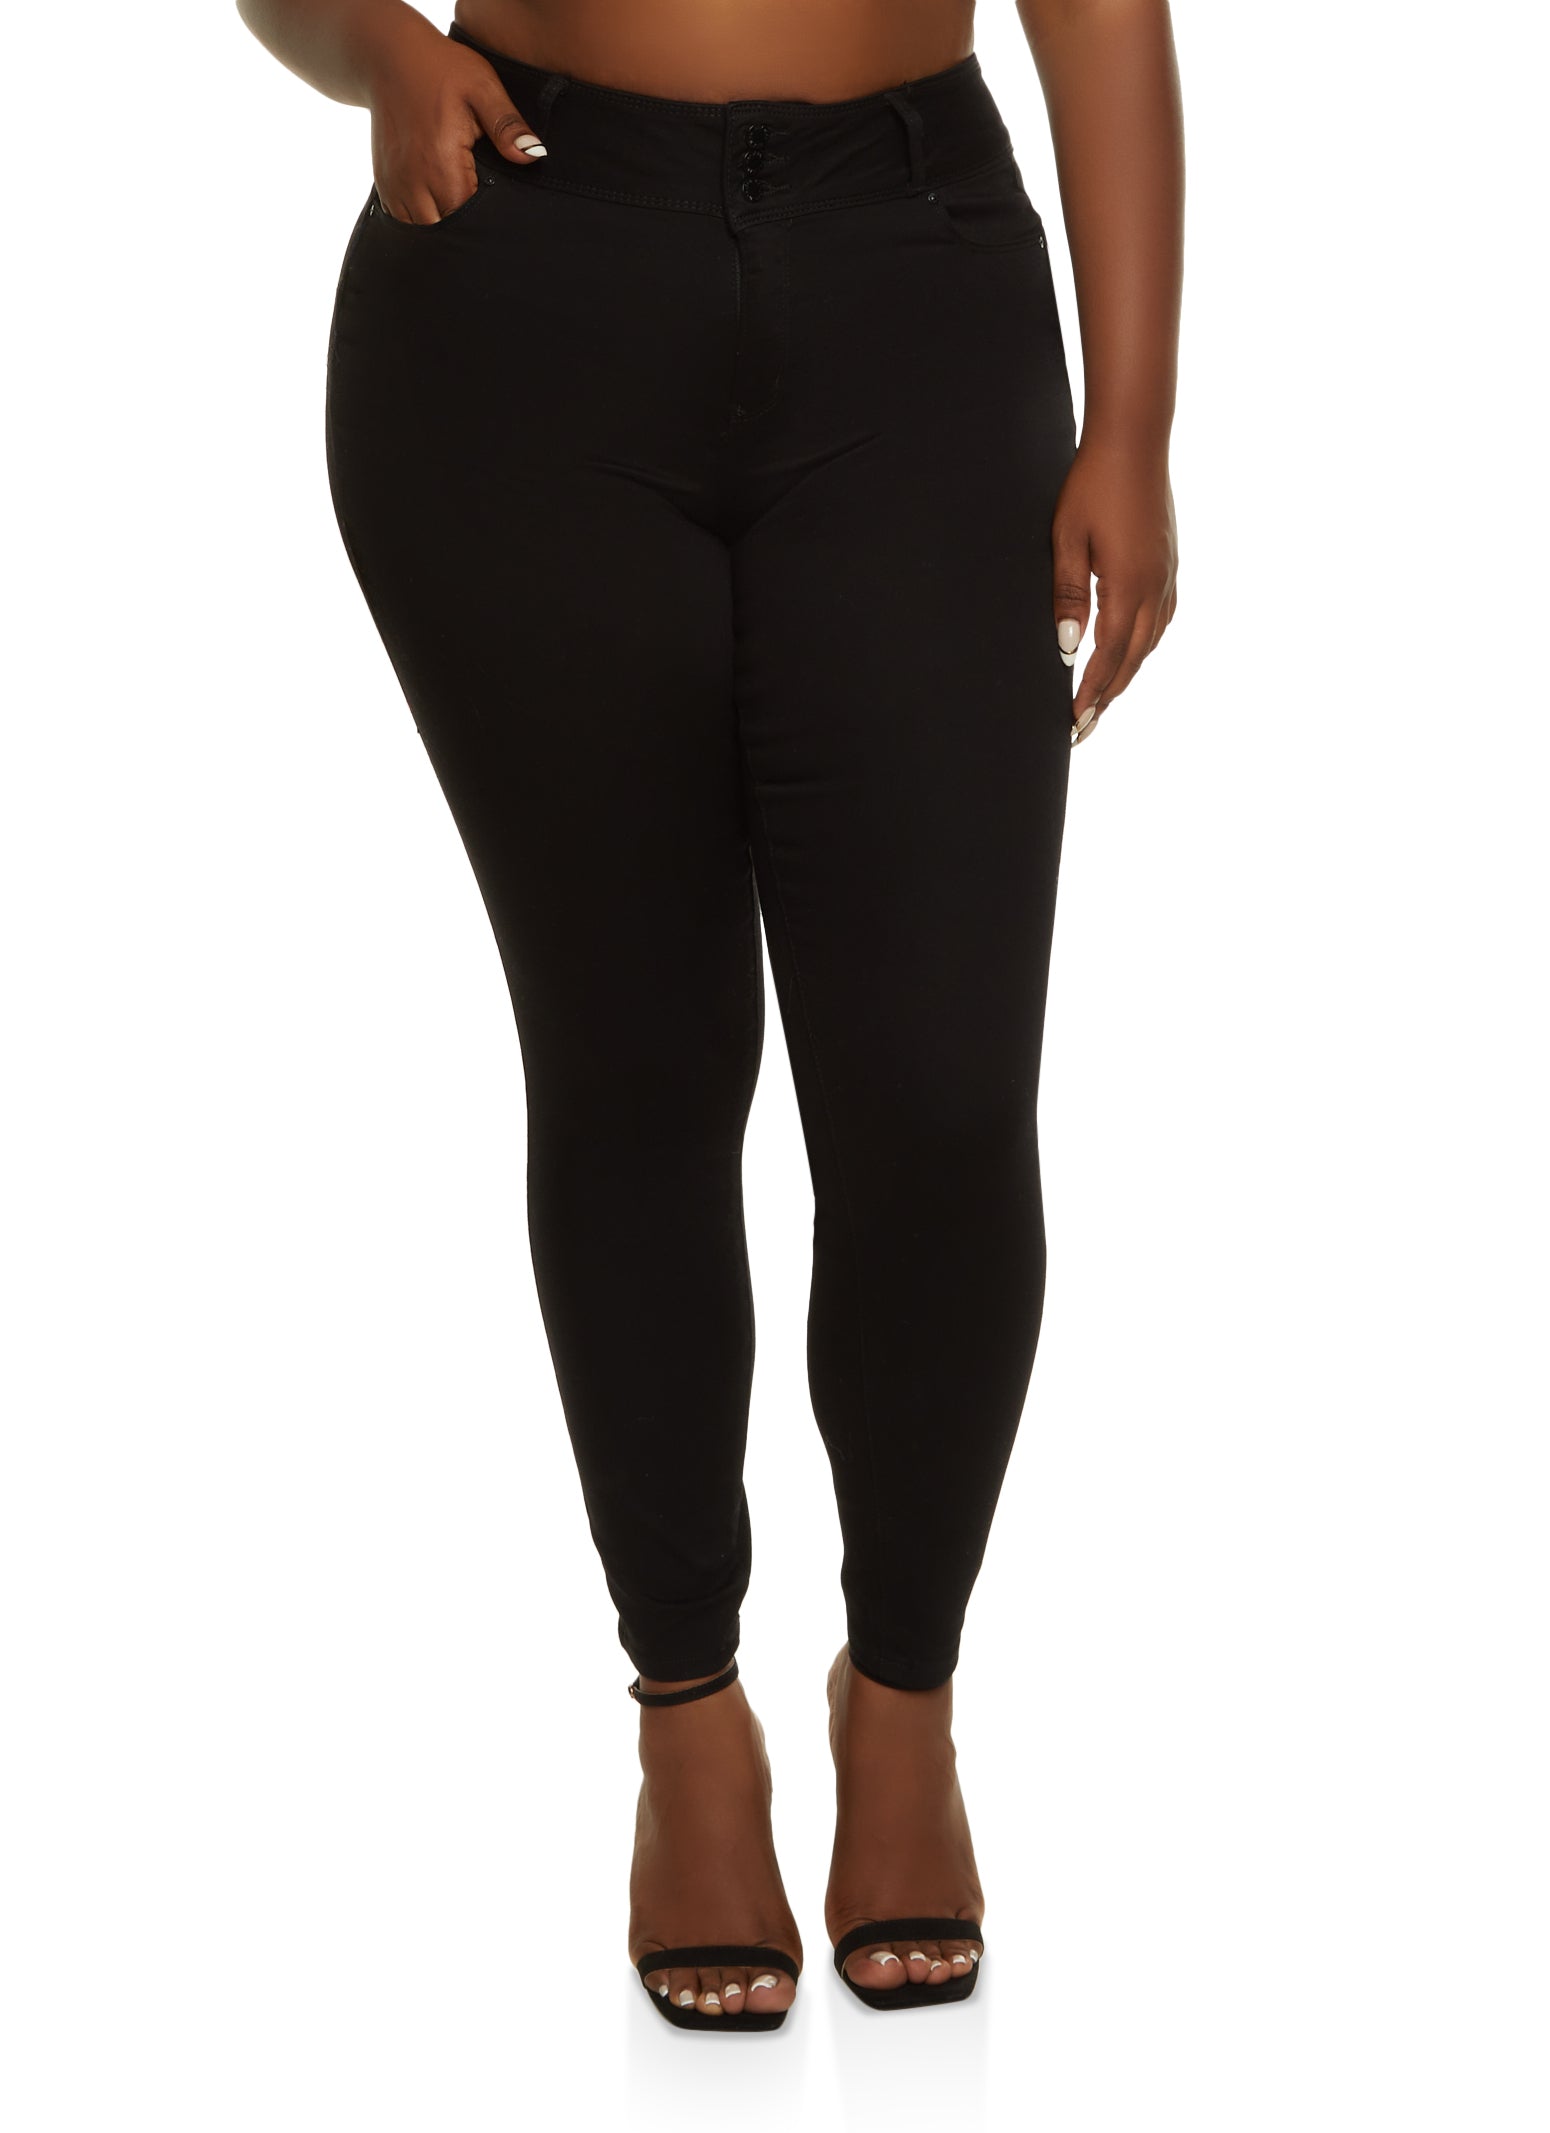 Plus Size High Waisted Jeans for Women, Everyday Low Prices